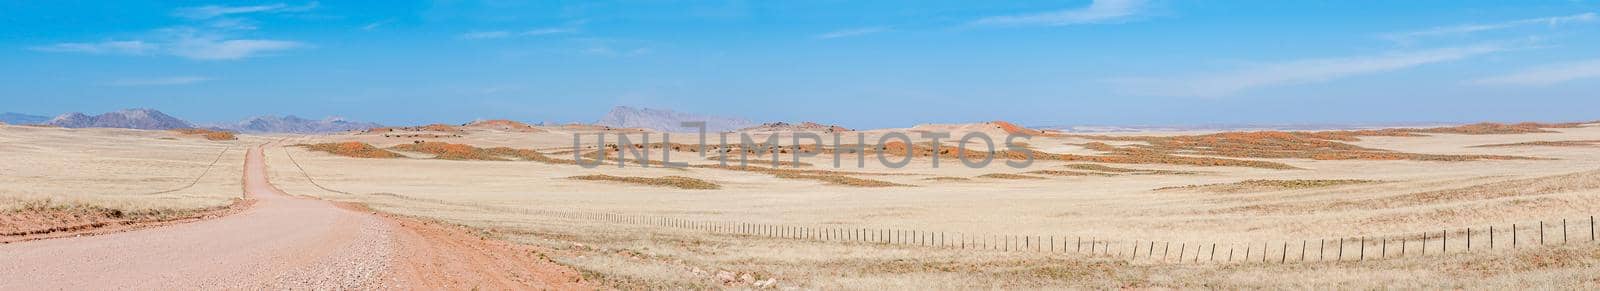 Panorama on road C14 south of the Tropic of Capricorn by dpreezg